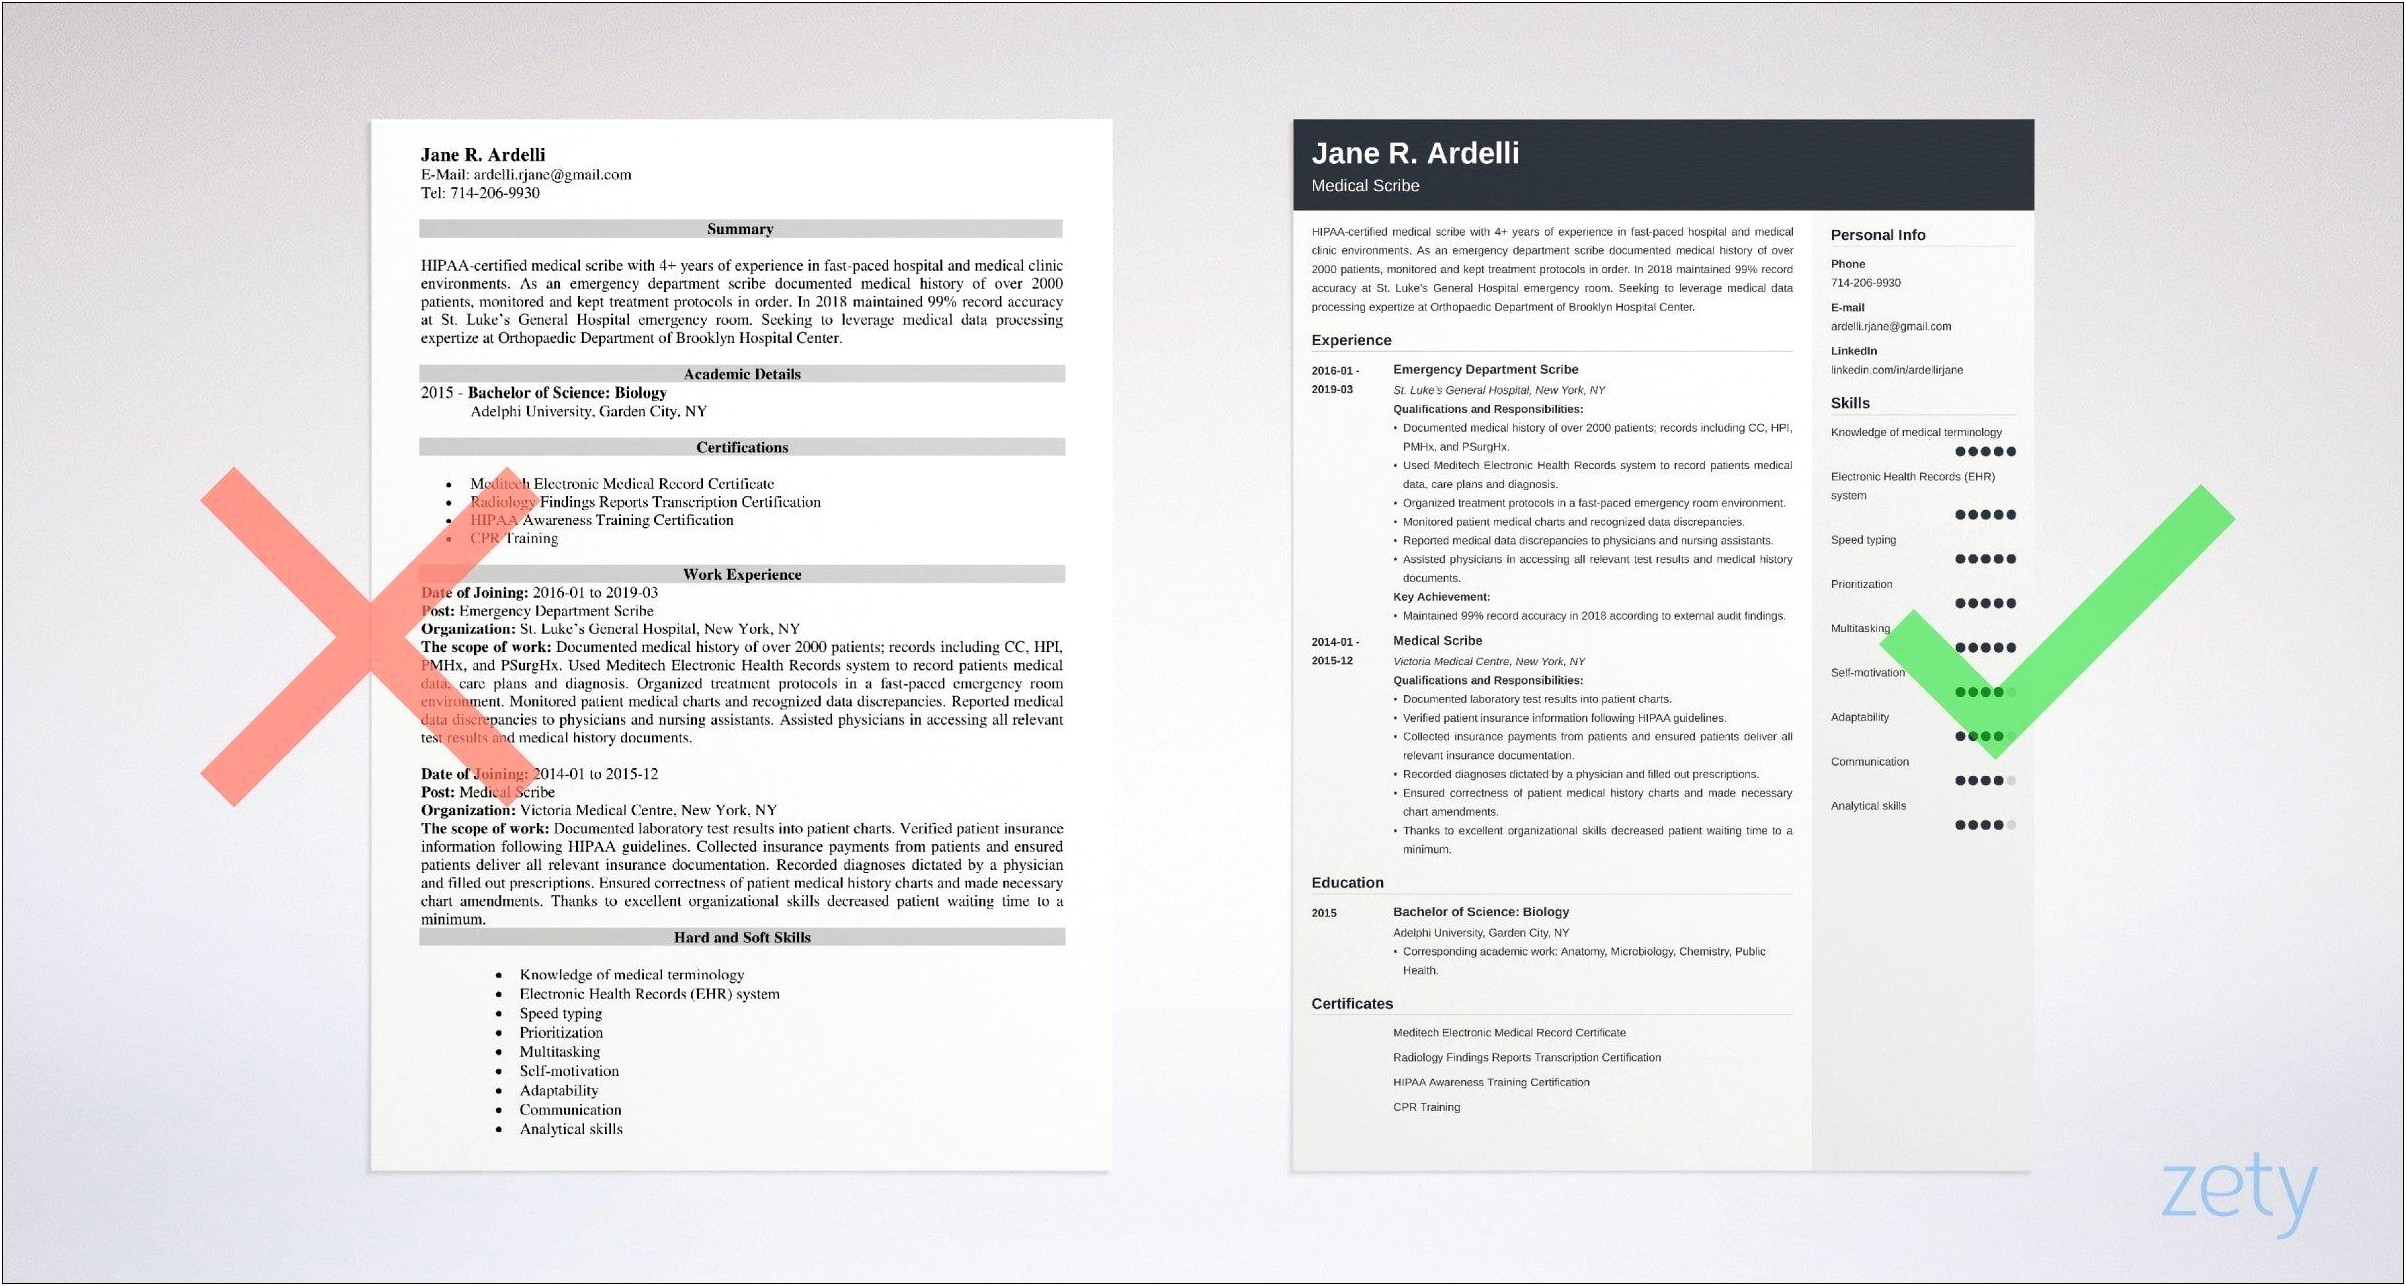 Examples Of Good Resume For Scribe